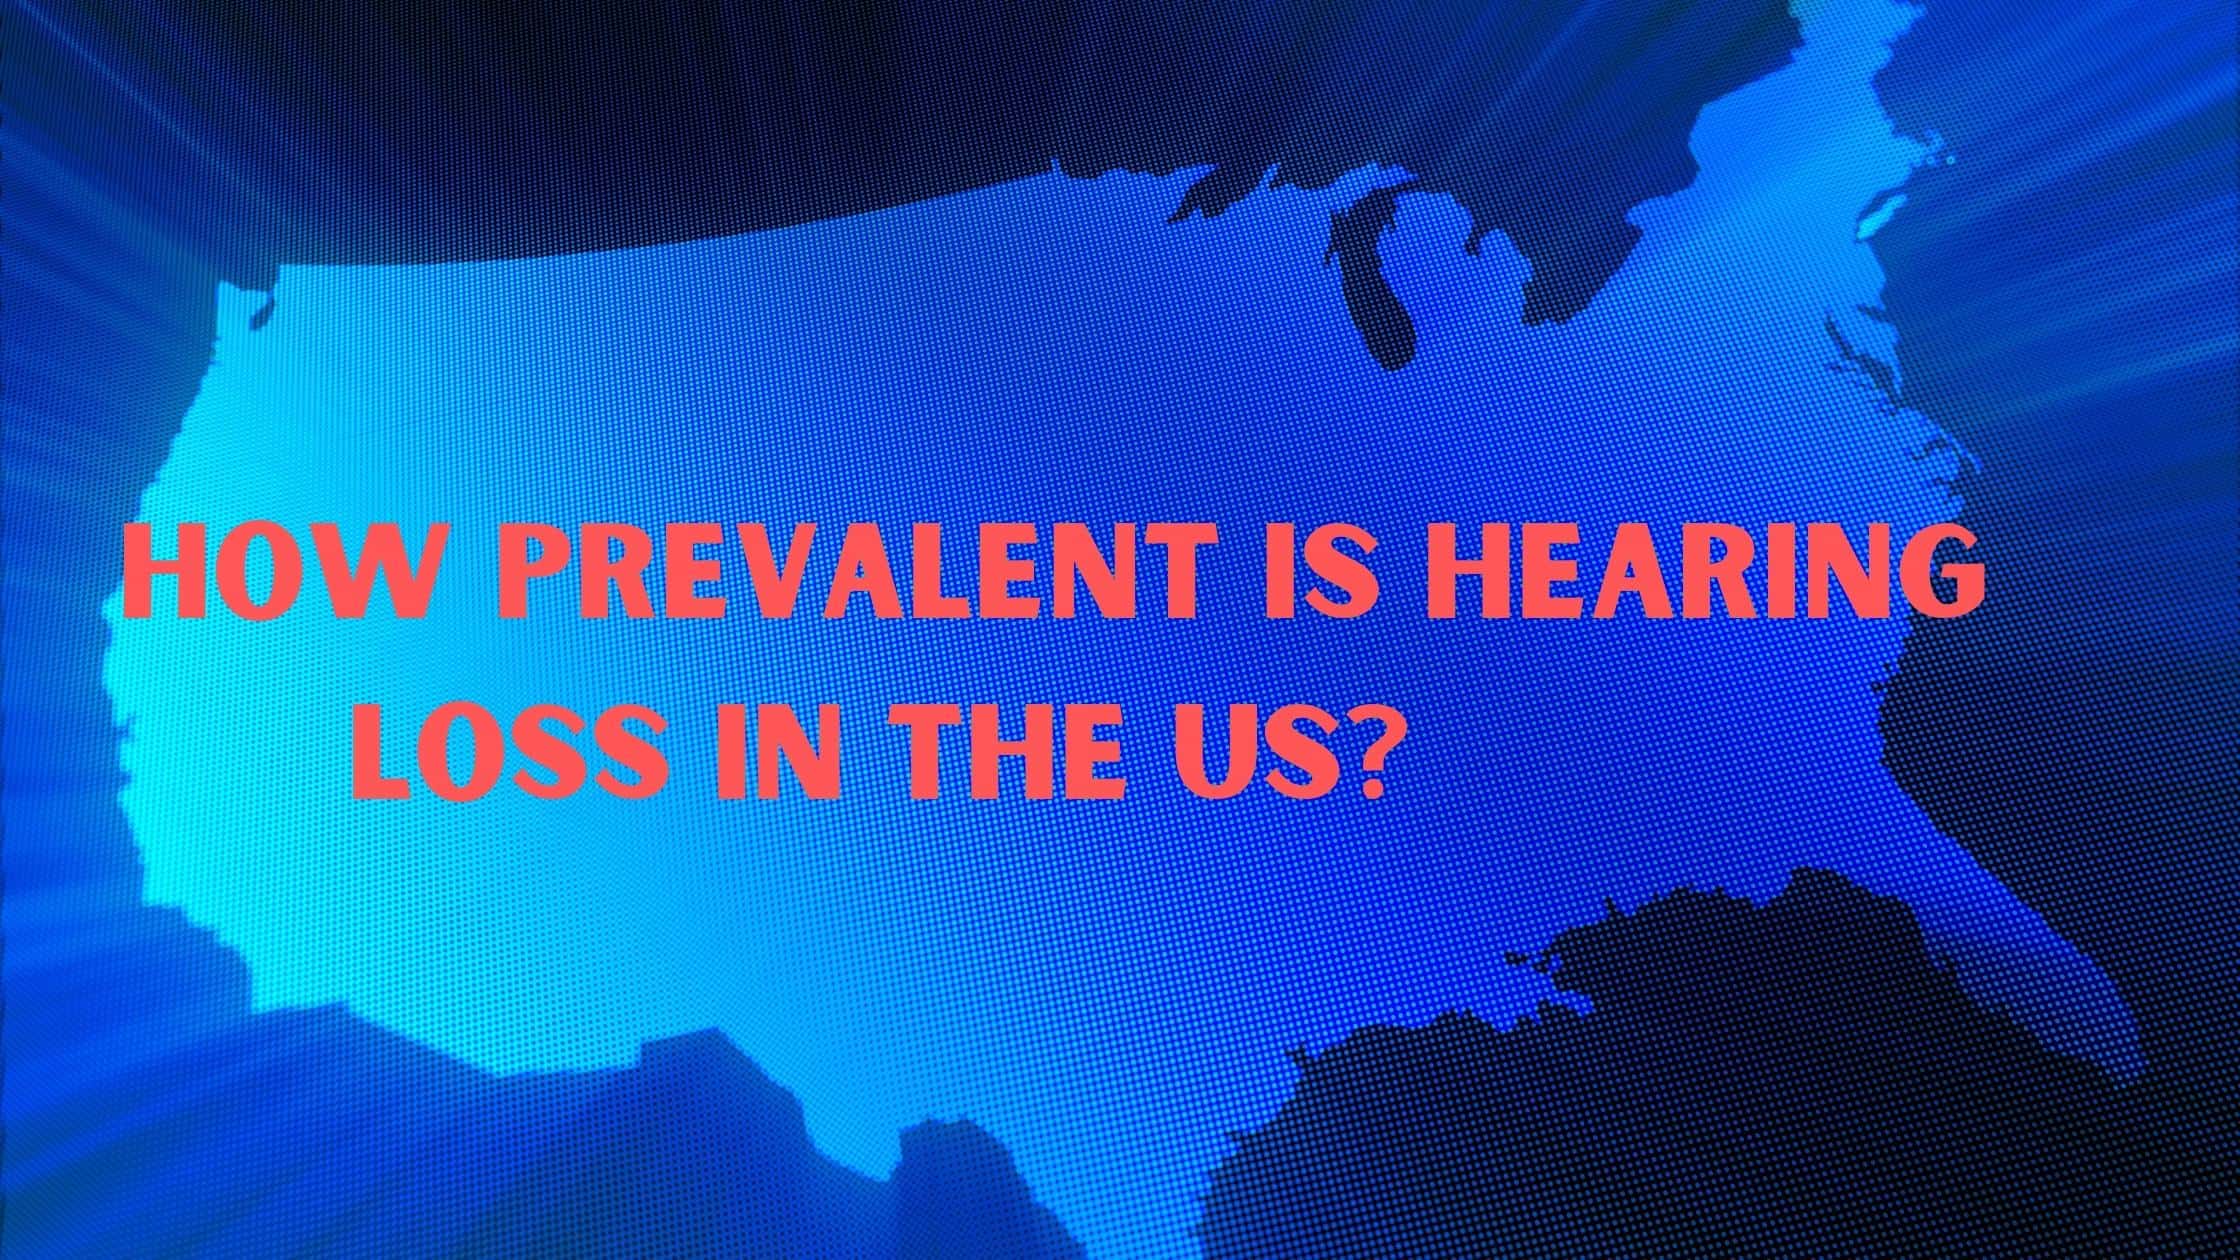 Featured image for “How Prevalent is Hearing Loss in the US?”